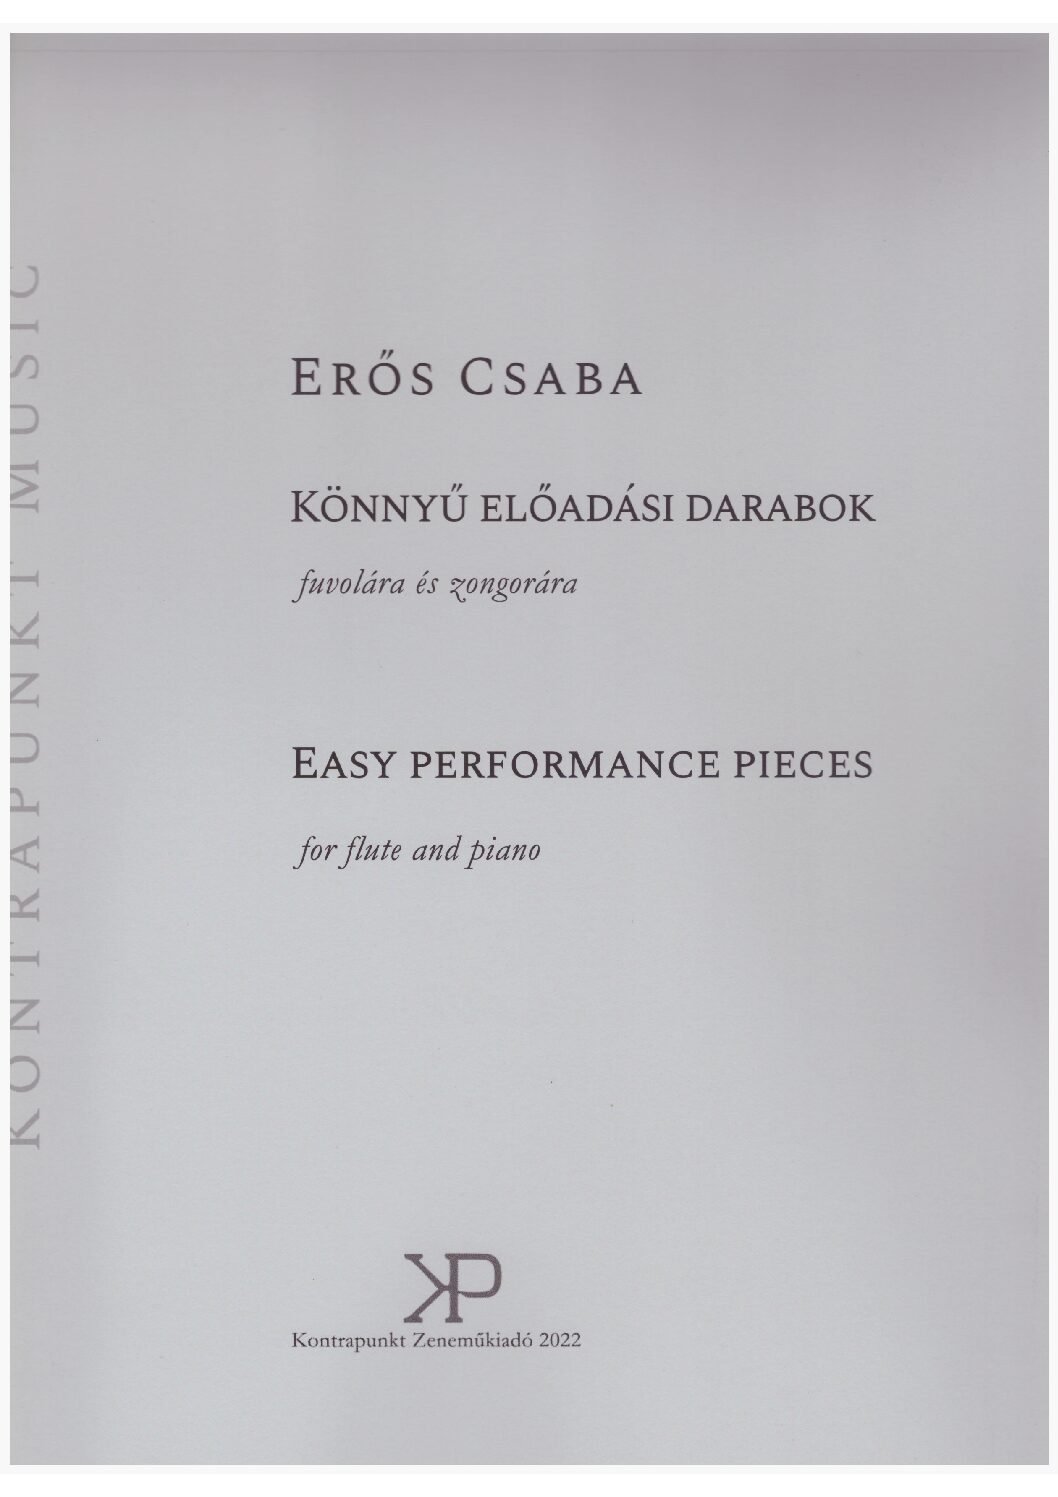 Csaba Erős: Easy performance pieces for flute and piano